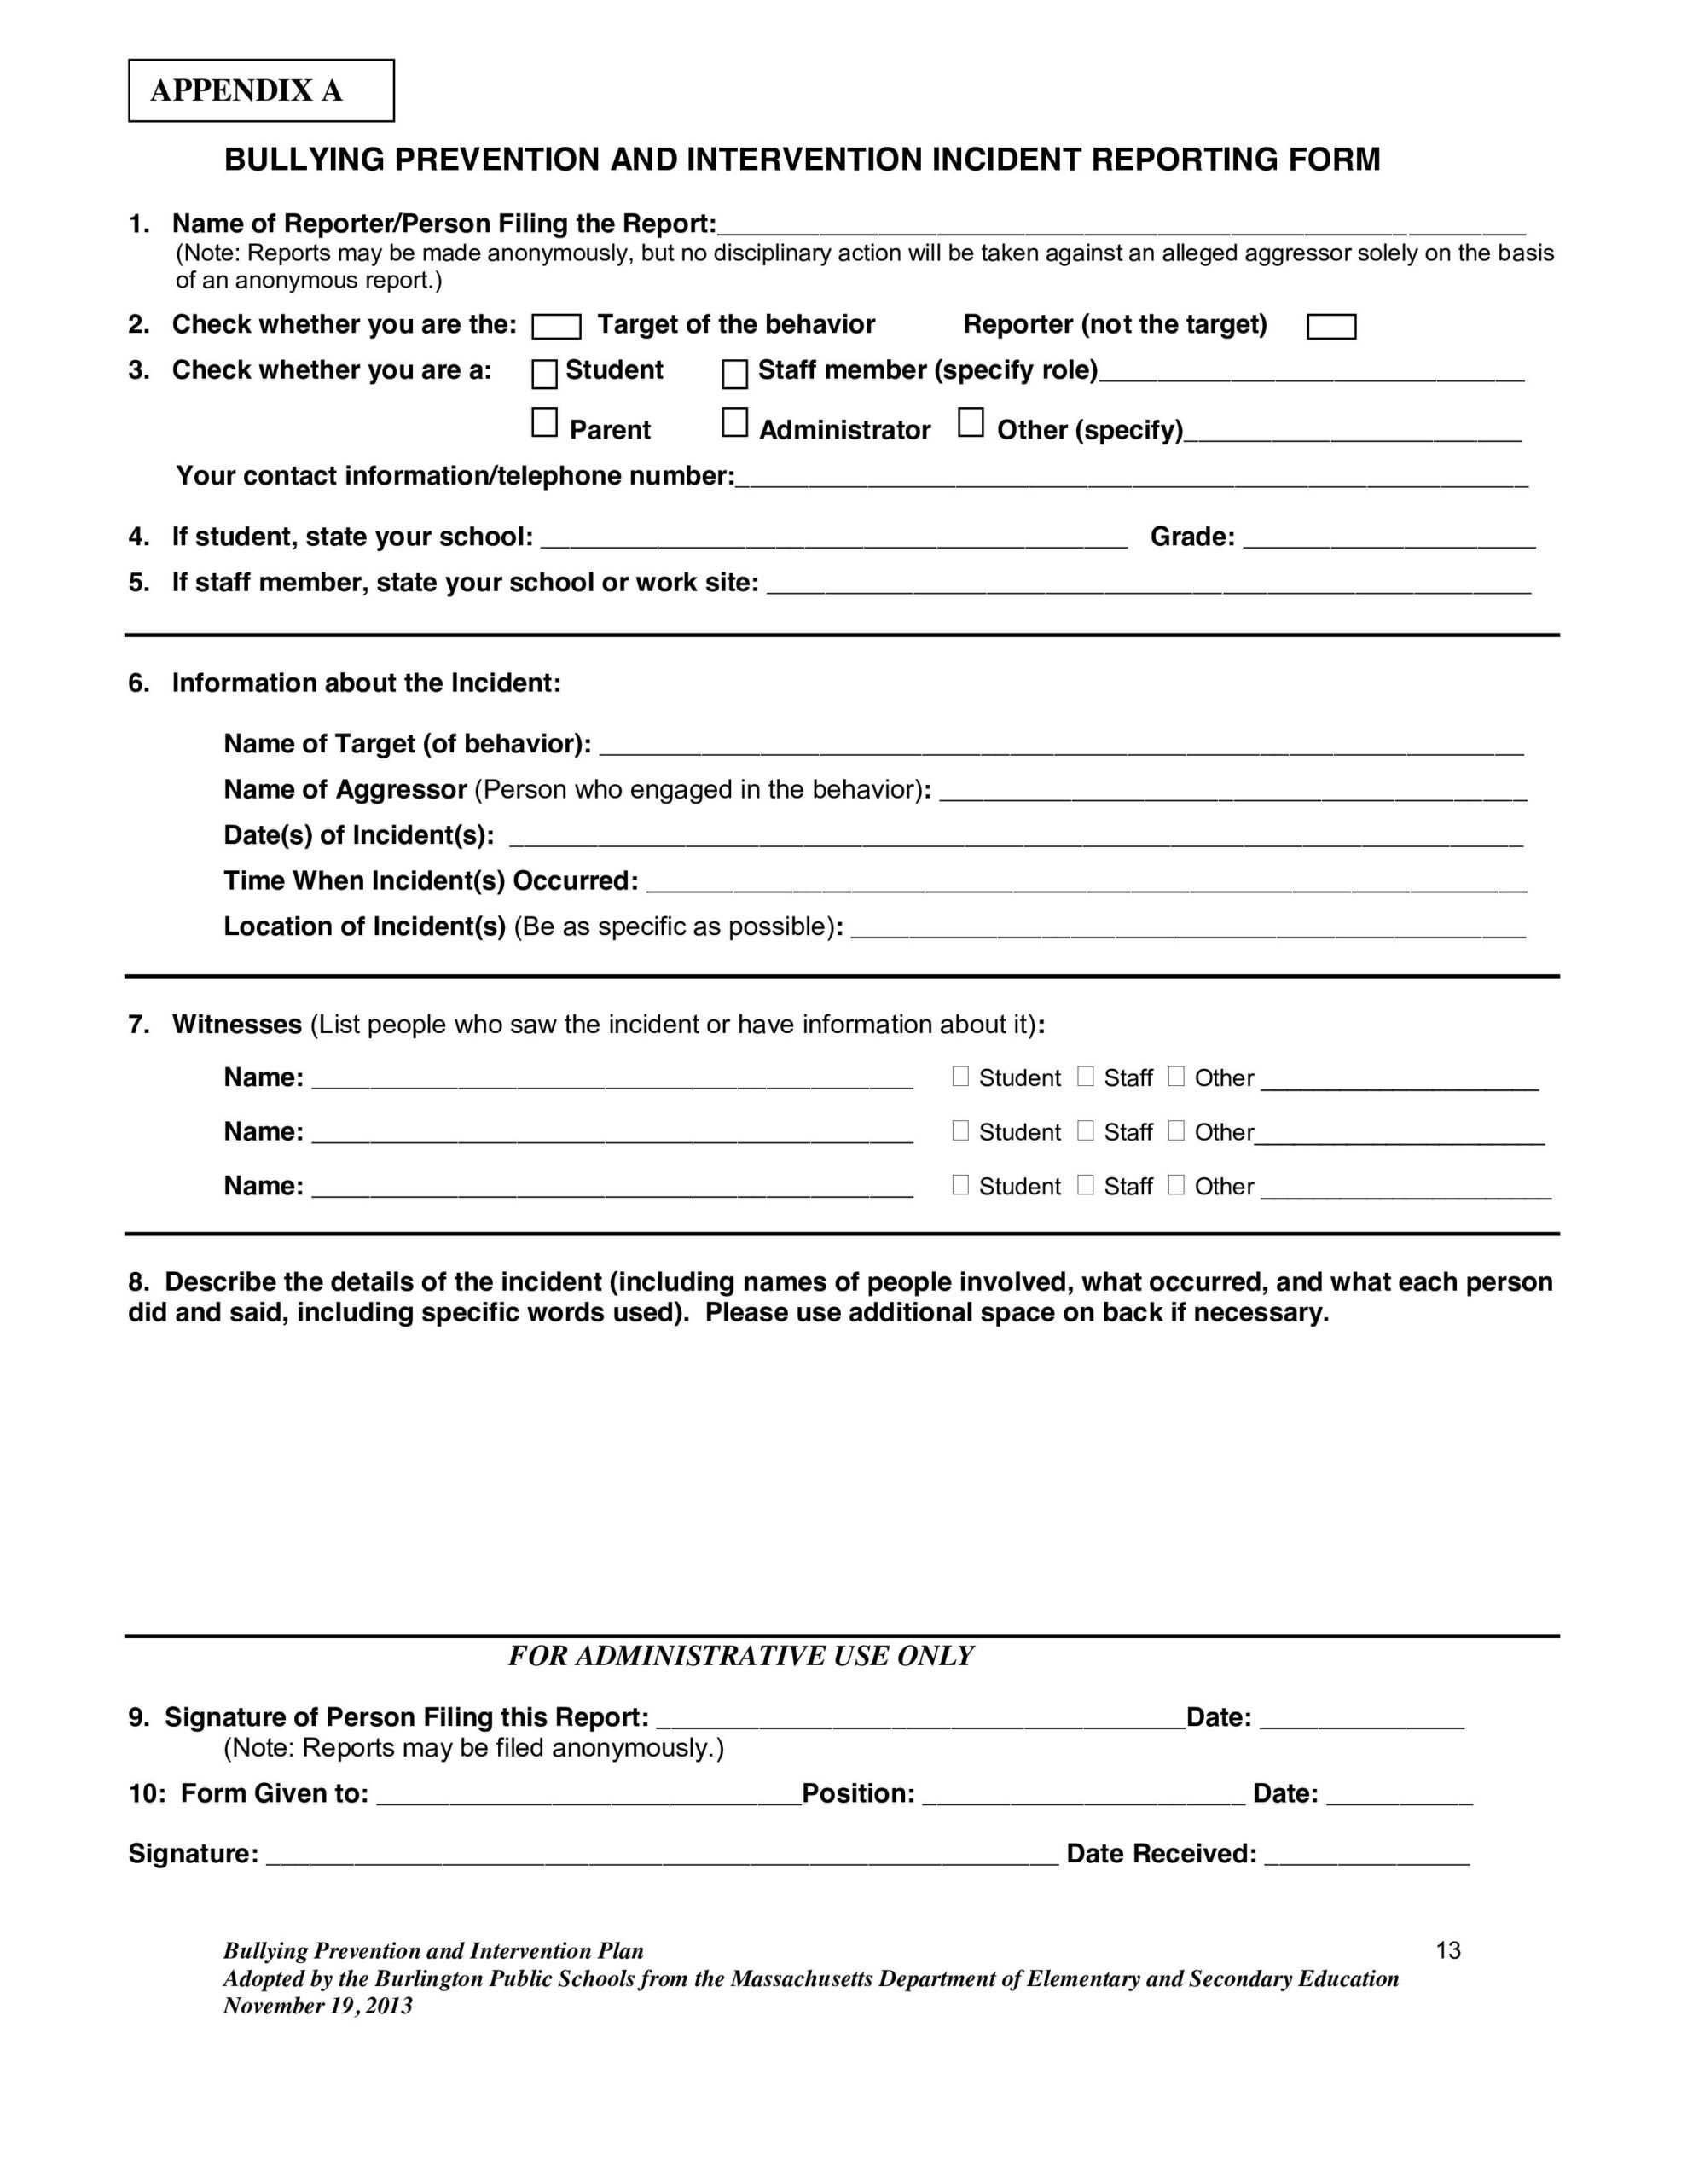 Bps Bullying Incident Report Form | Marshall Simonds Middle For School Incident Report Template